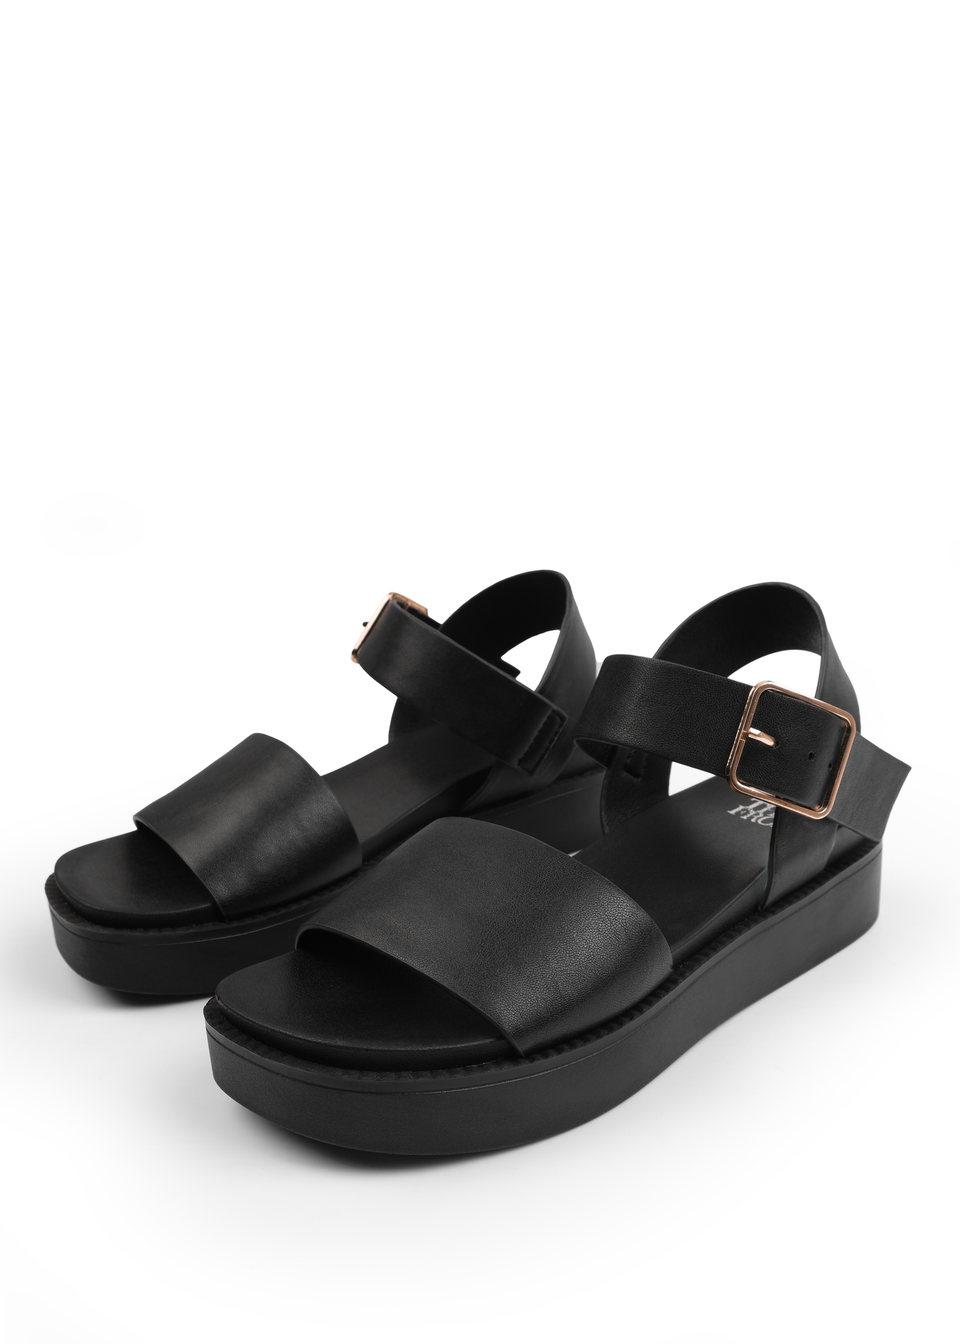 Where's That From Black Phoenix Wide Fit PU Flat Sandals